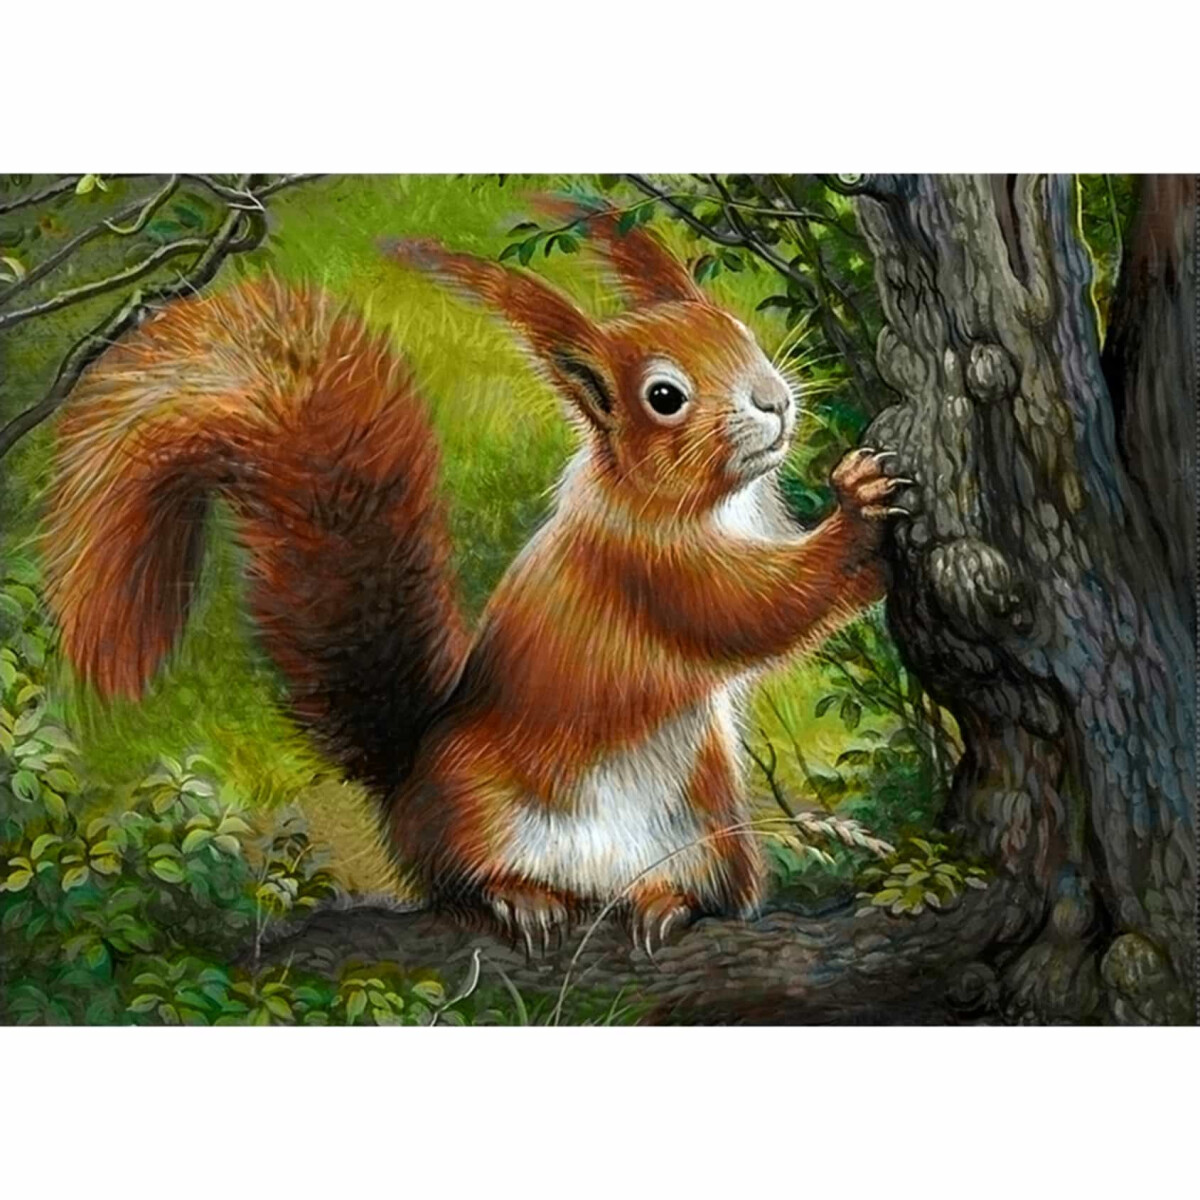 CdA Diamond Embroidery Kit "Forest squirrel" 27...